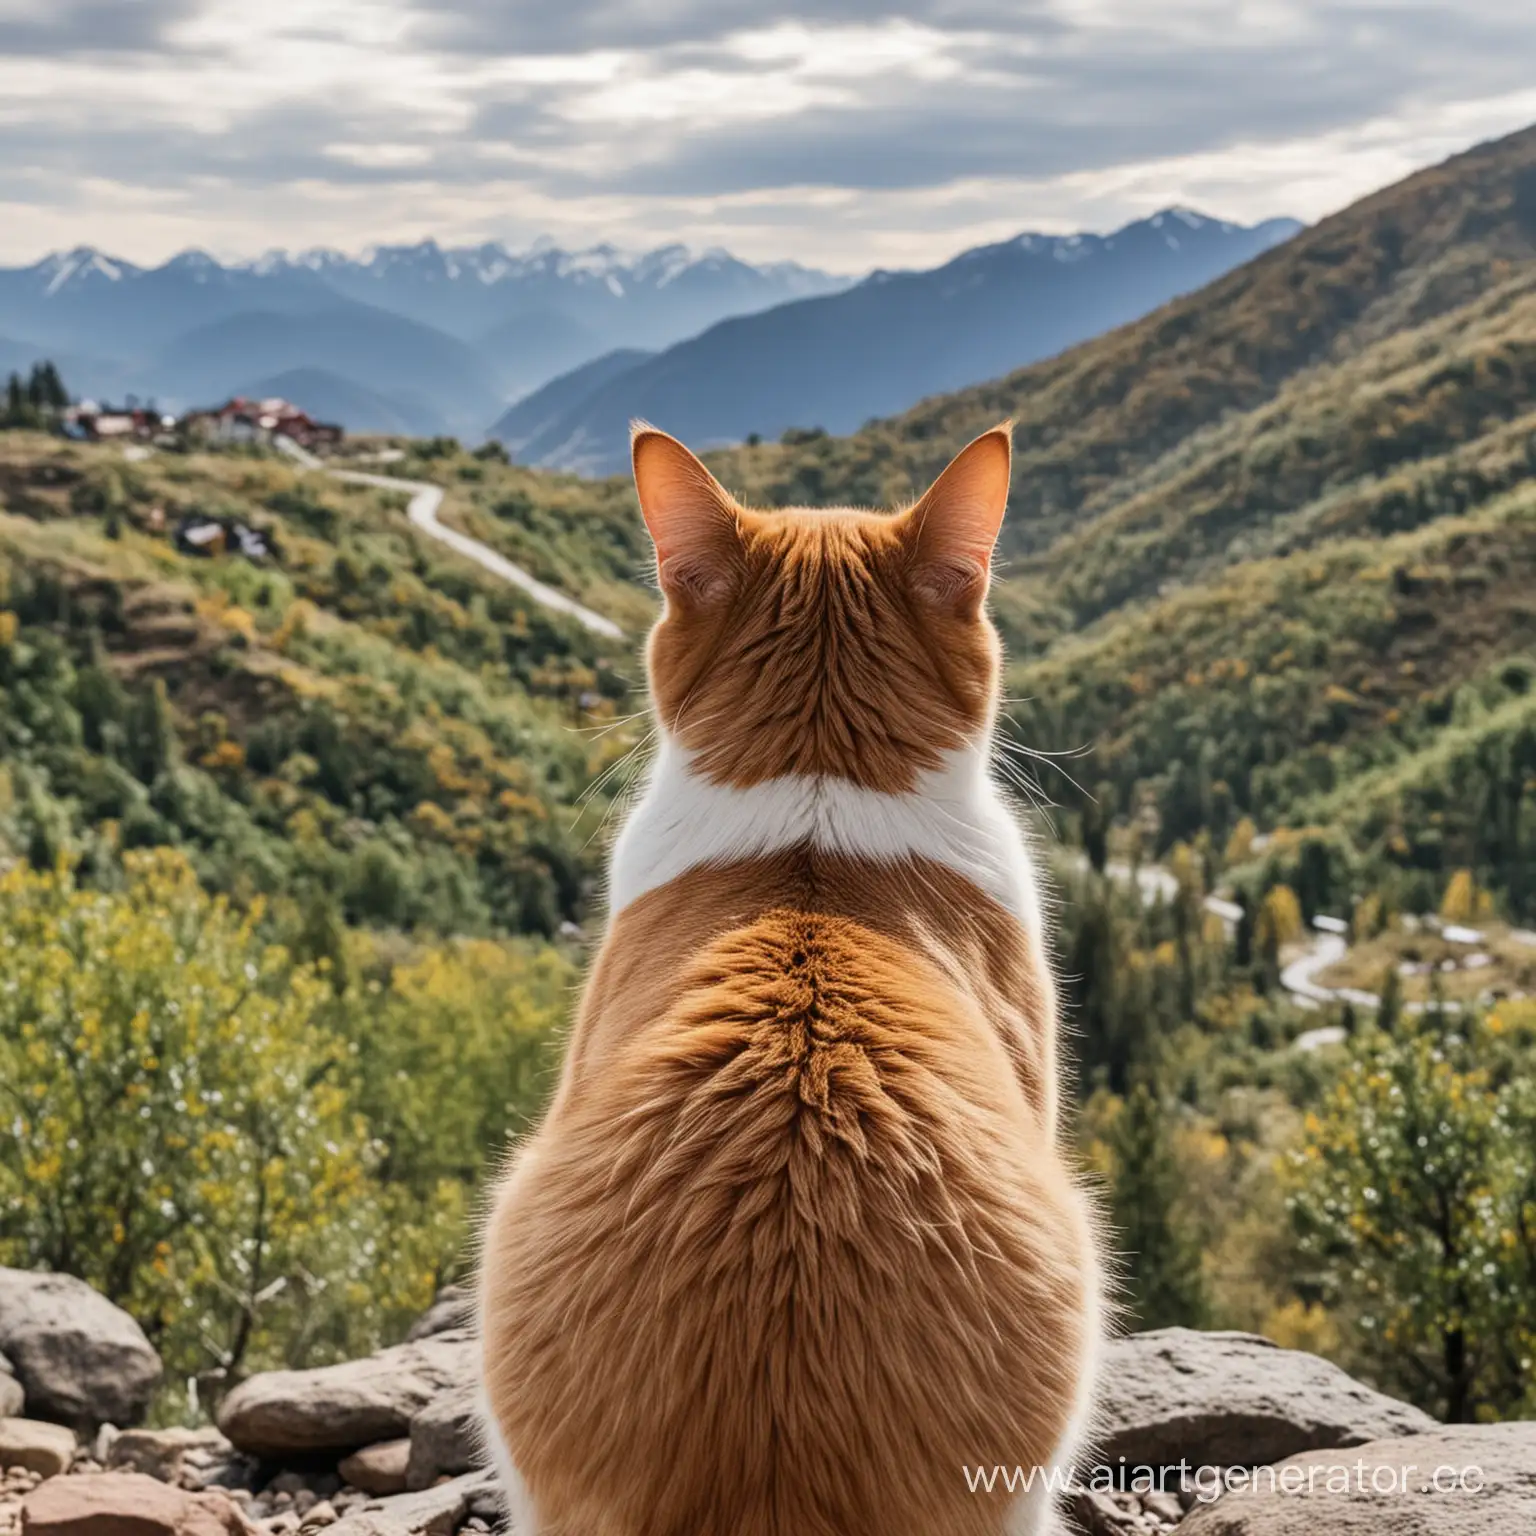 The cat is a rear view looking into the distance at the mountains